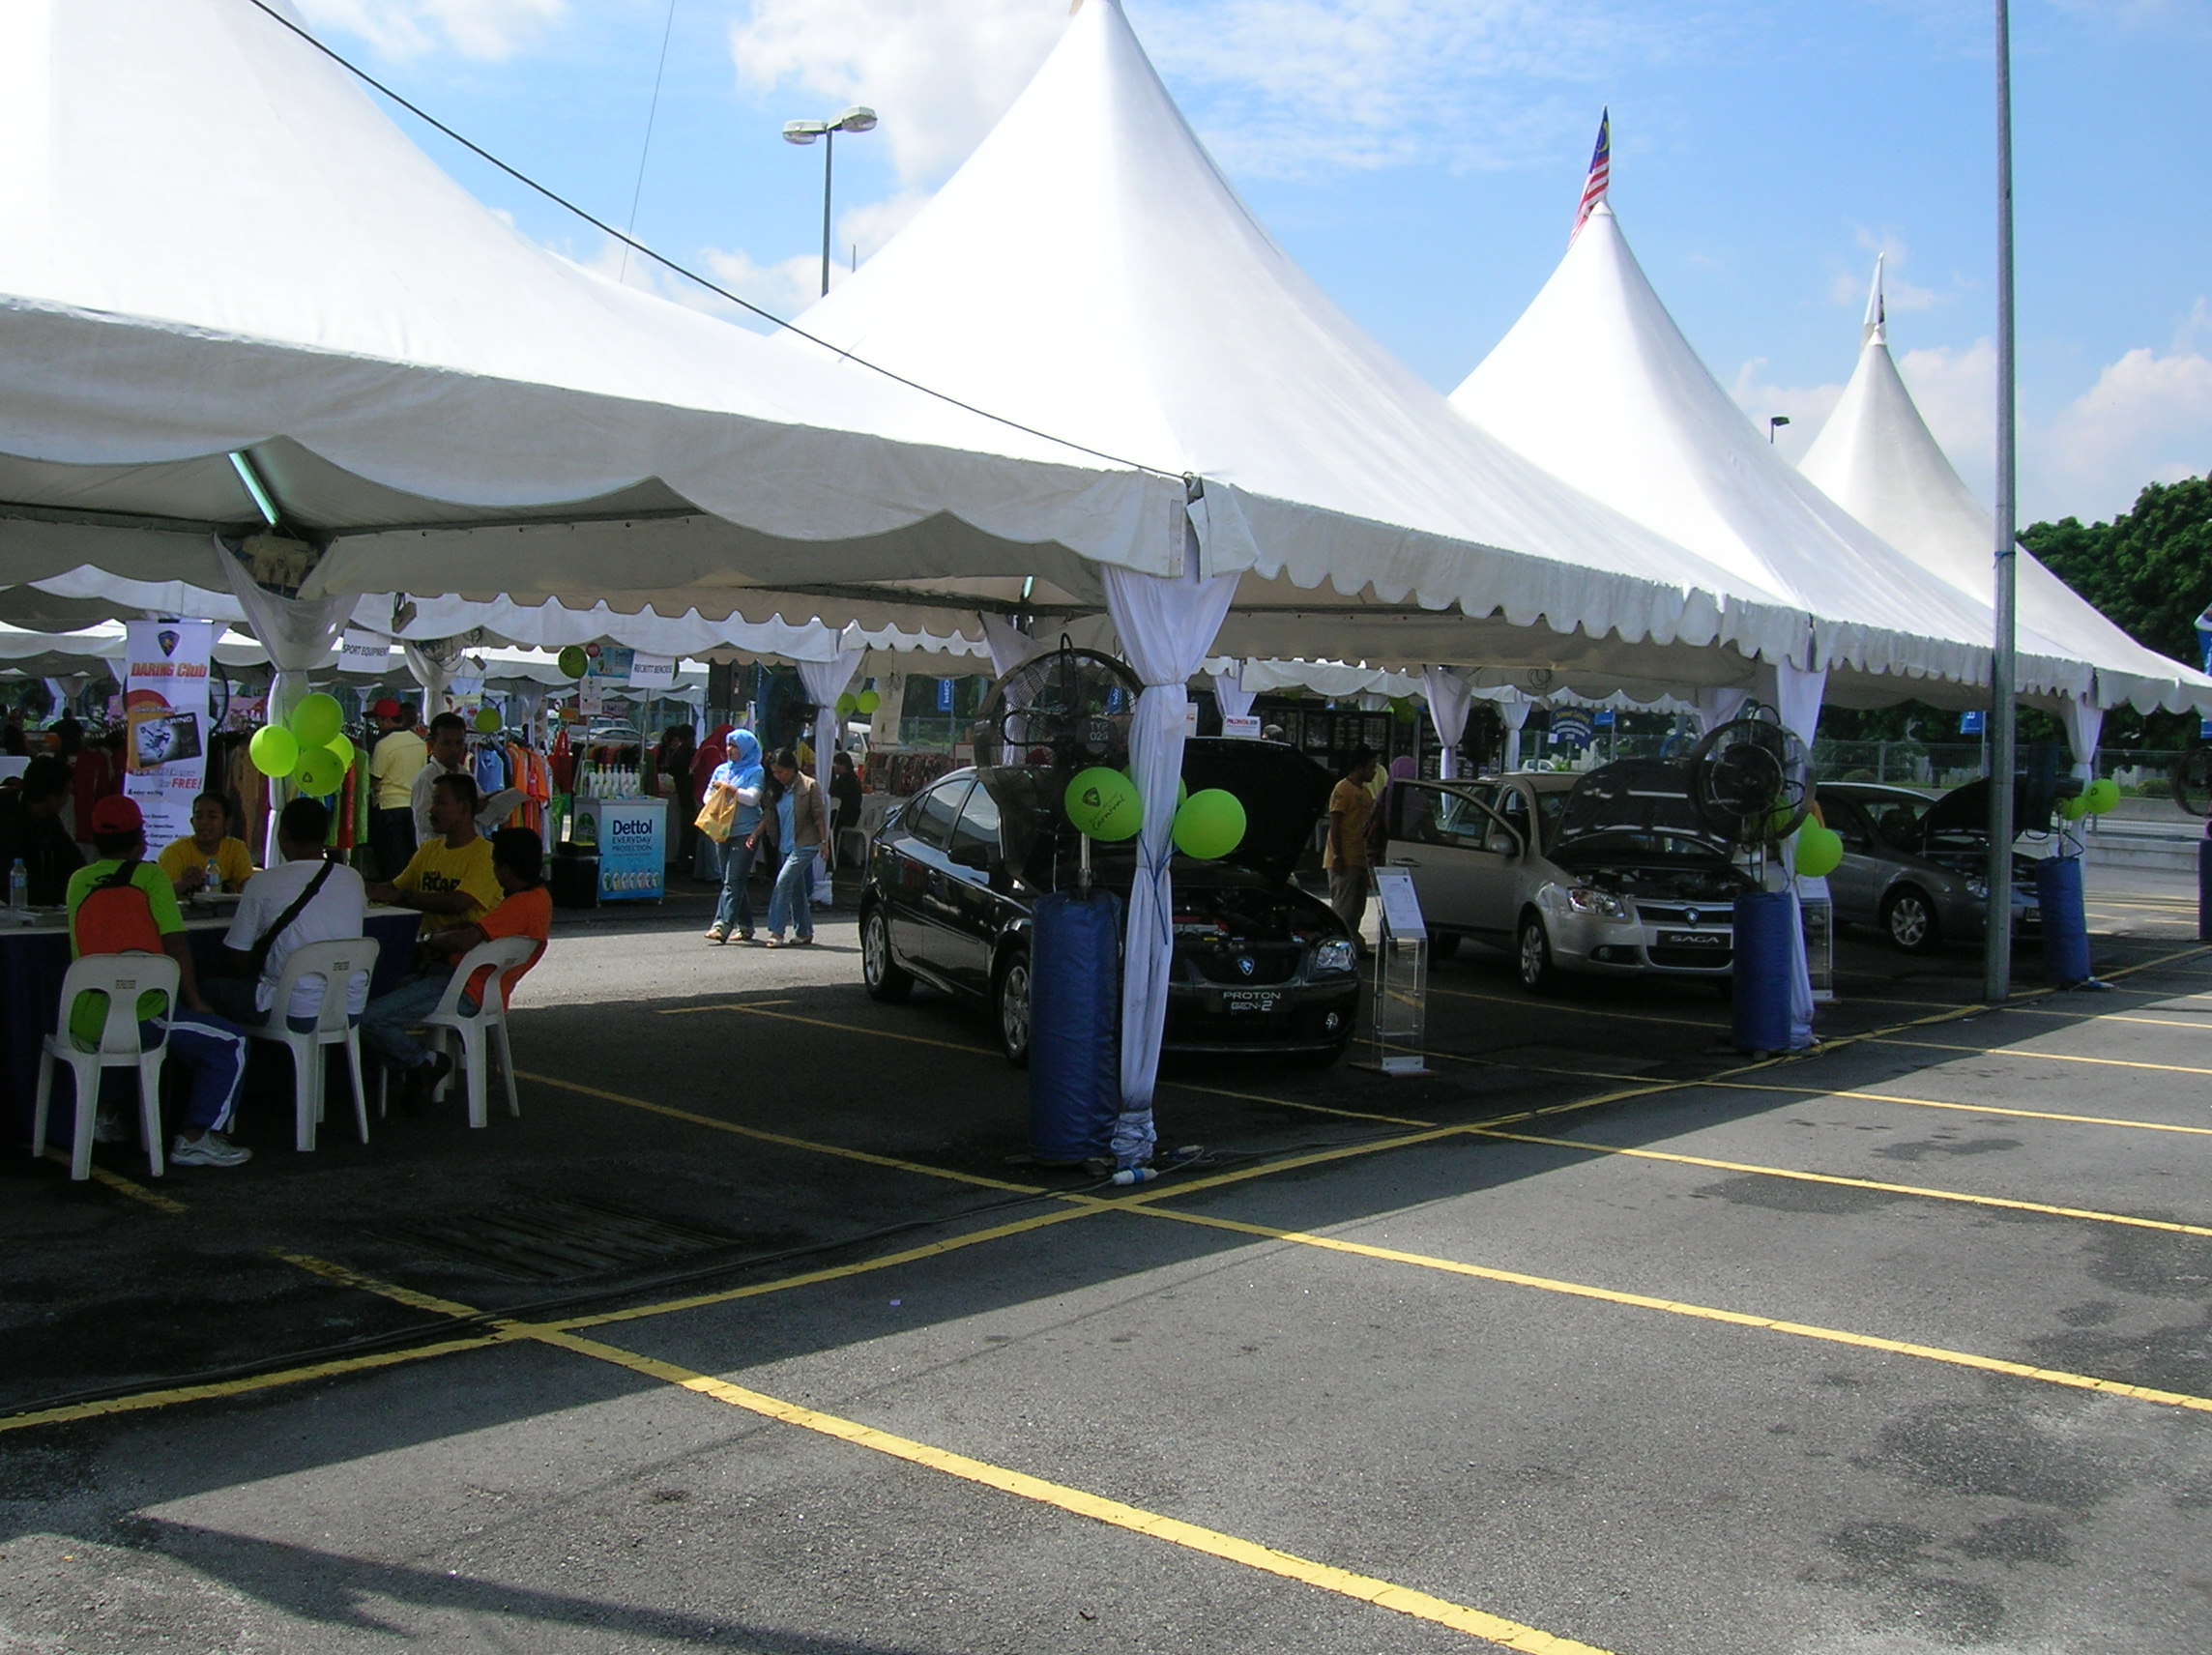 Sales booth for Proton cars.